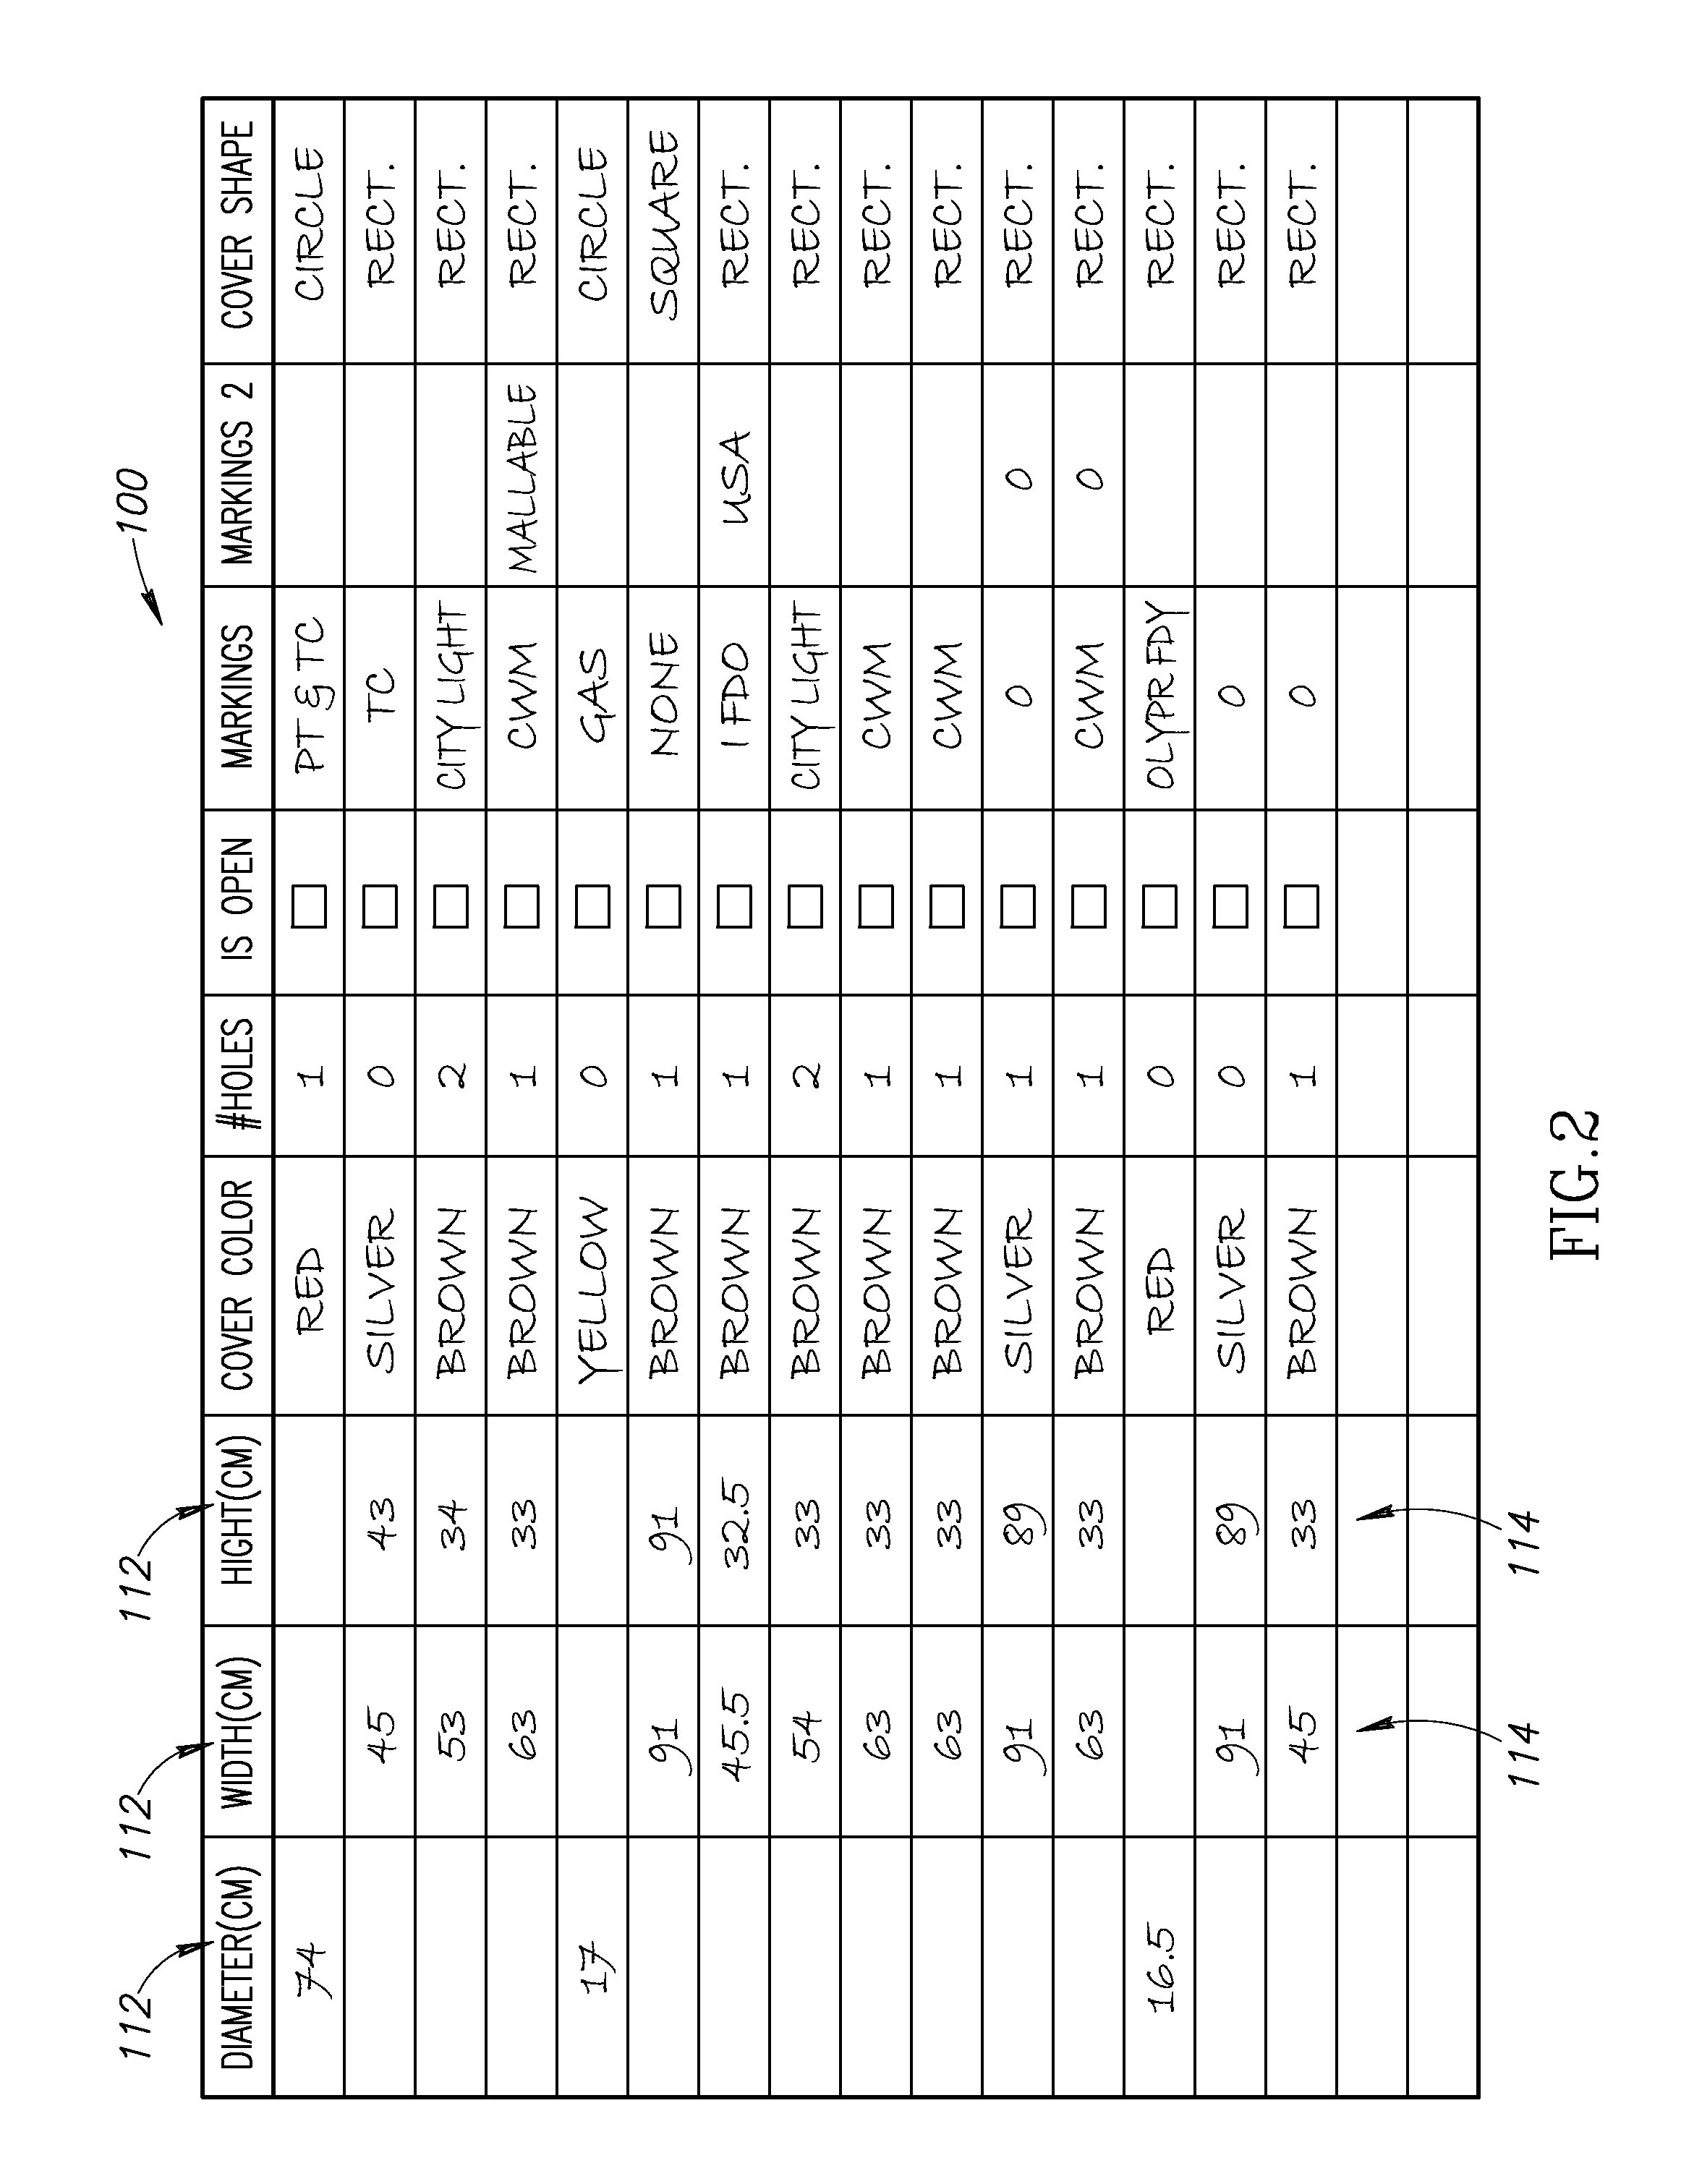 Attribute value management system and methods